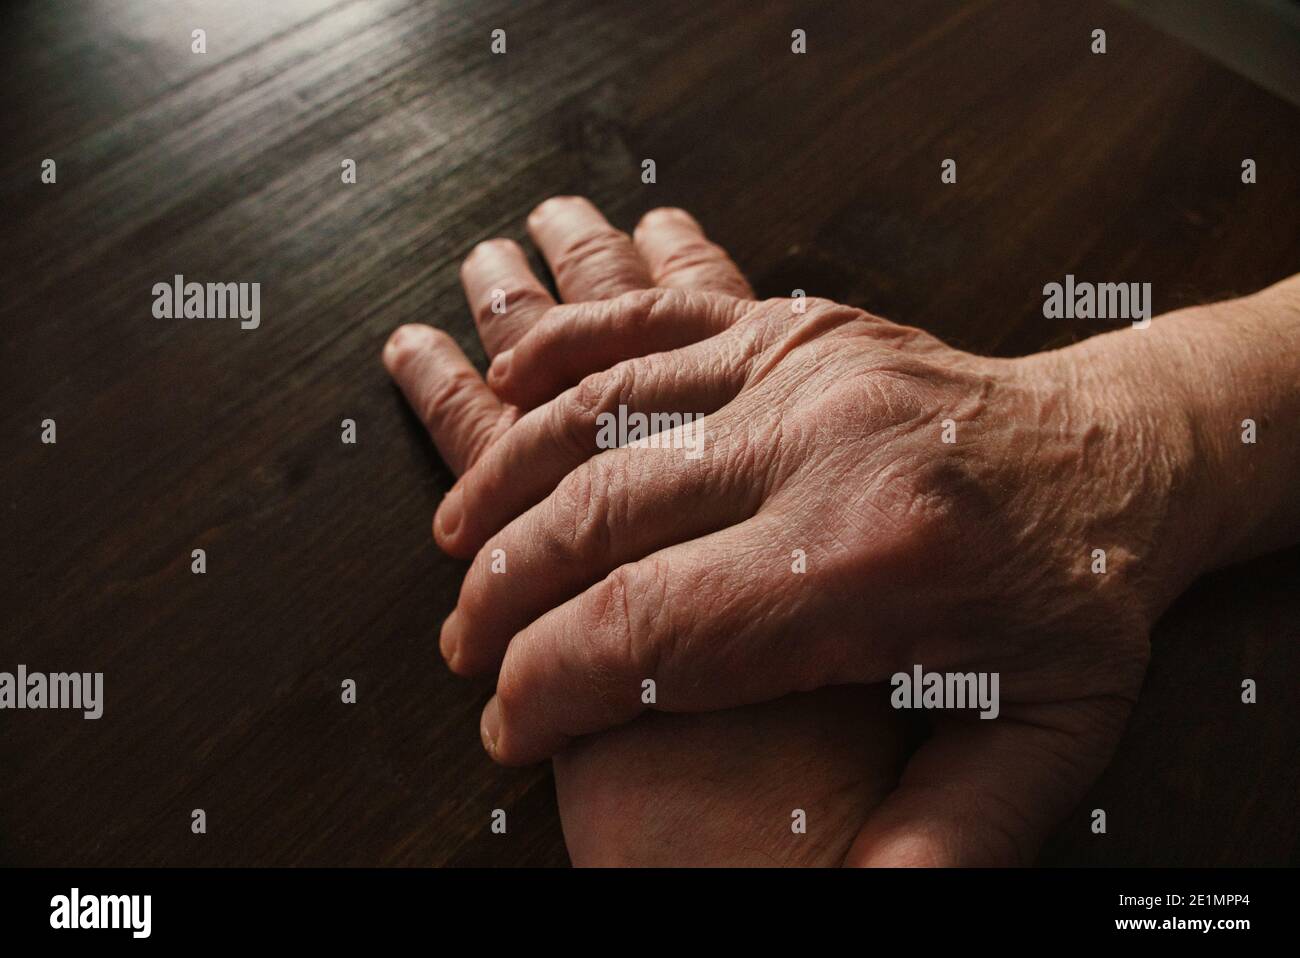 Hands of old man on wooden table. Hand over hand. High angle view. Stock Photo